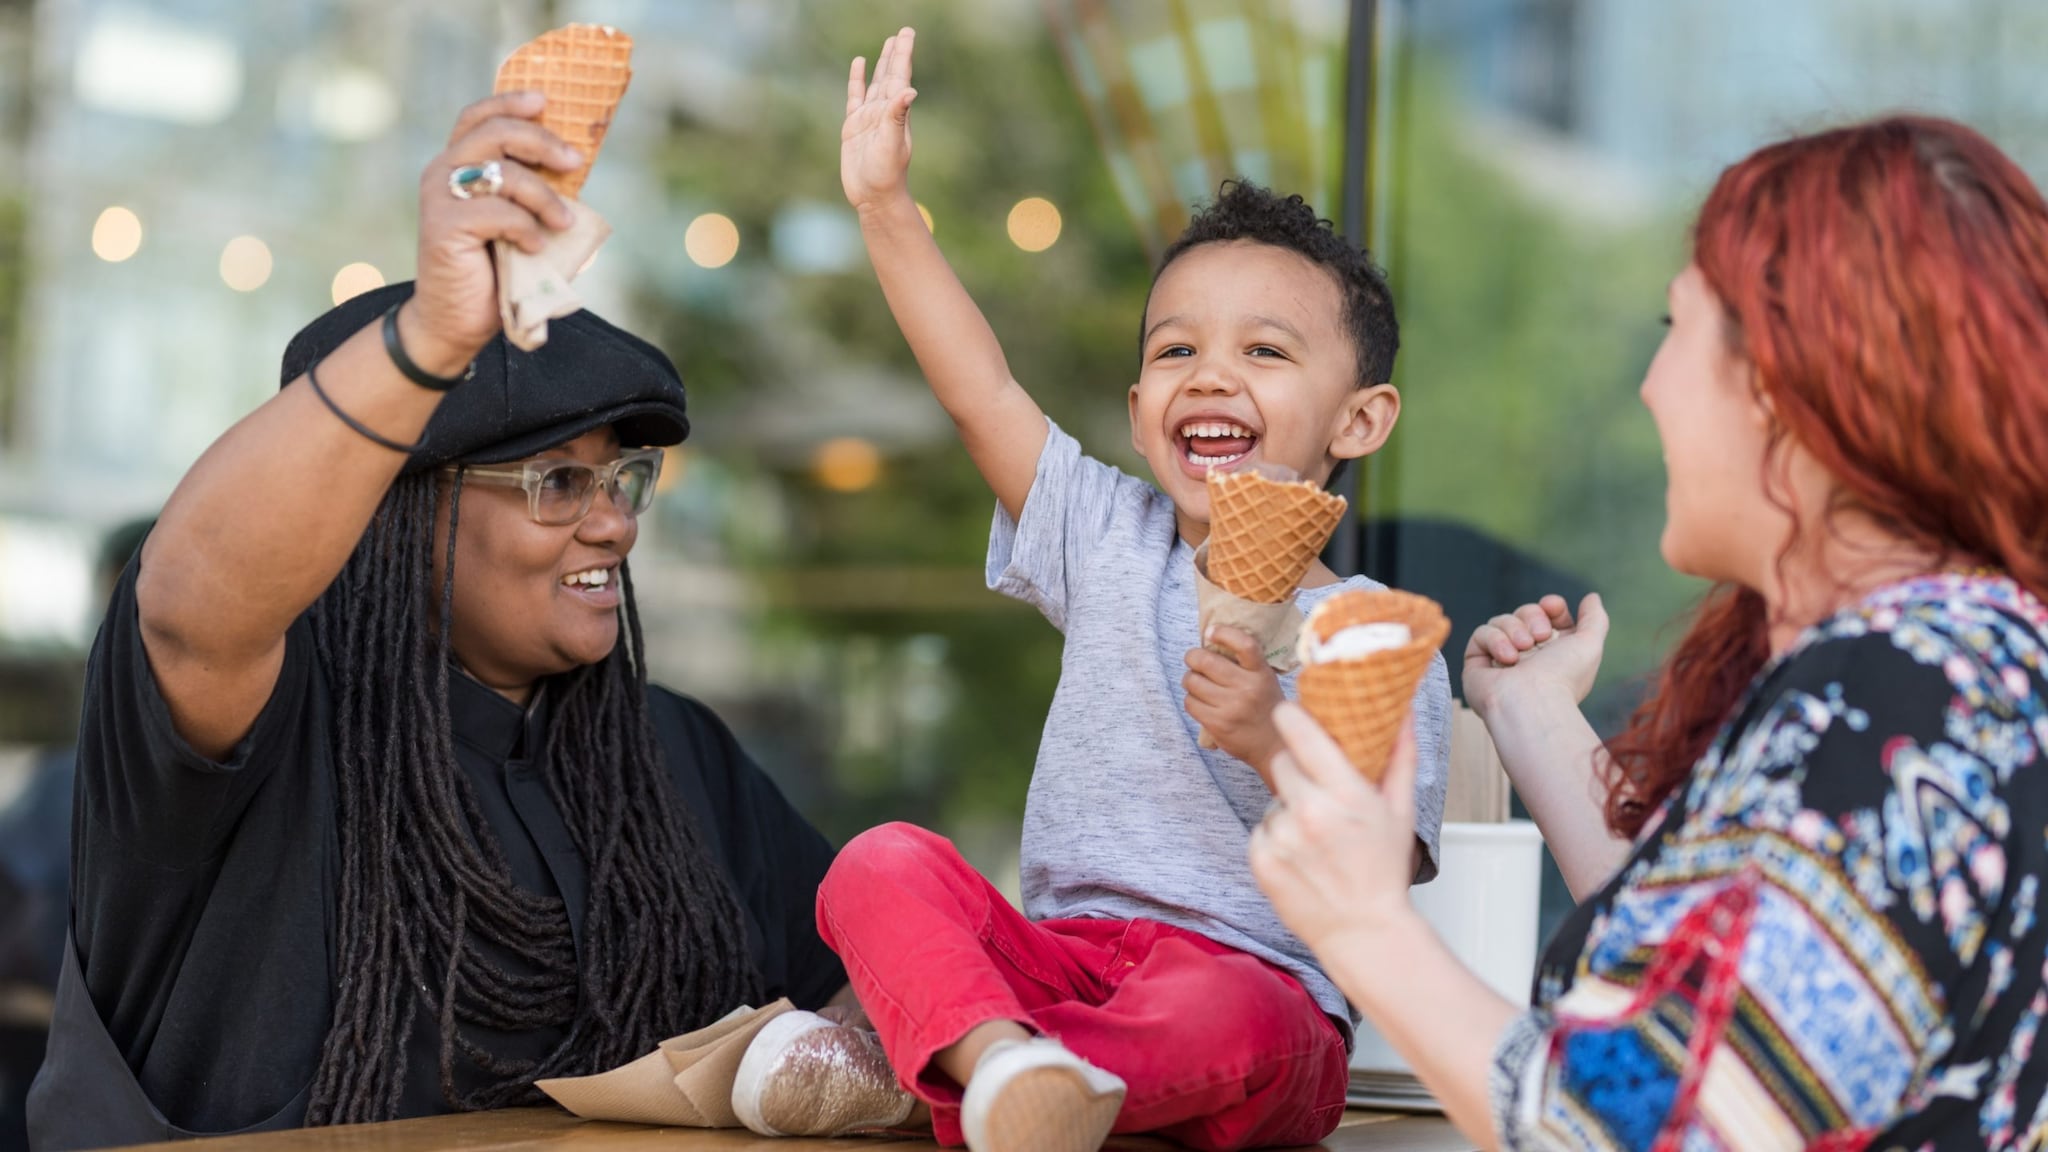 Young child happily eating ice cream with two mothers.